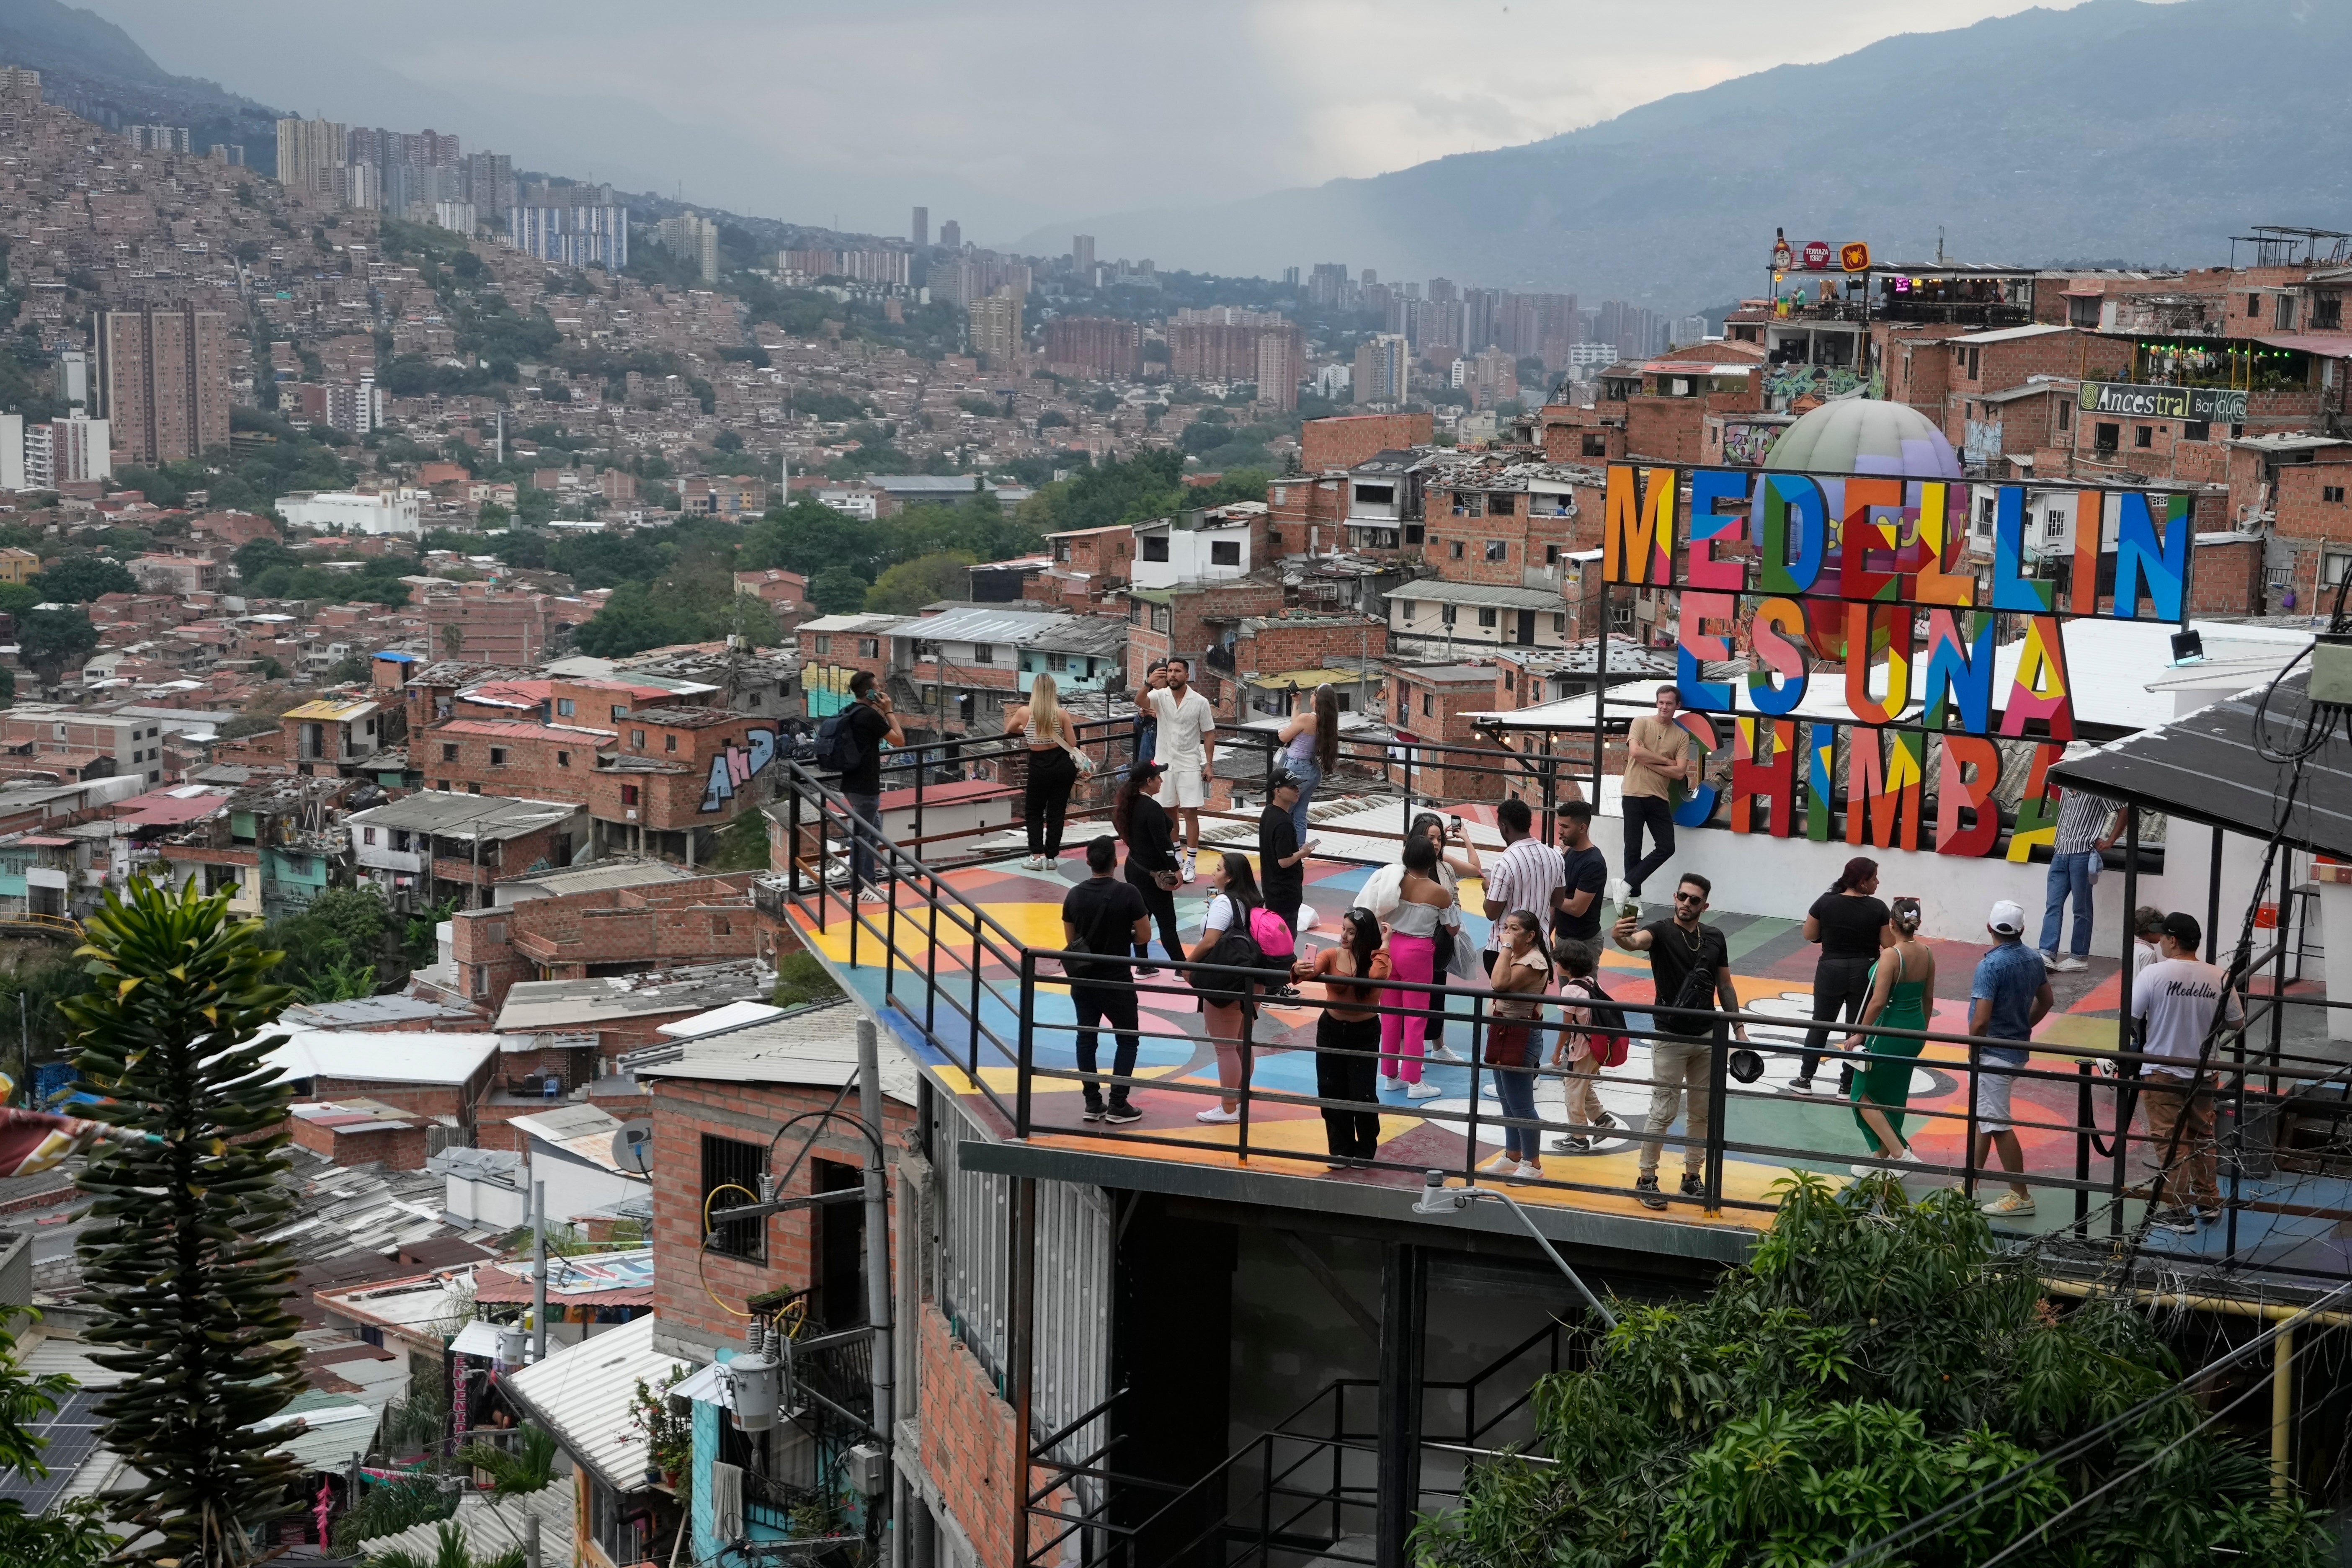 Tourists take photos in the Comuna 13 neighborhood of Medellin, Colombia